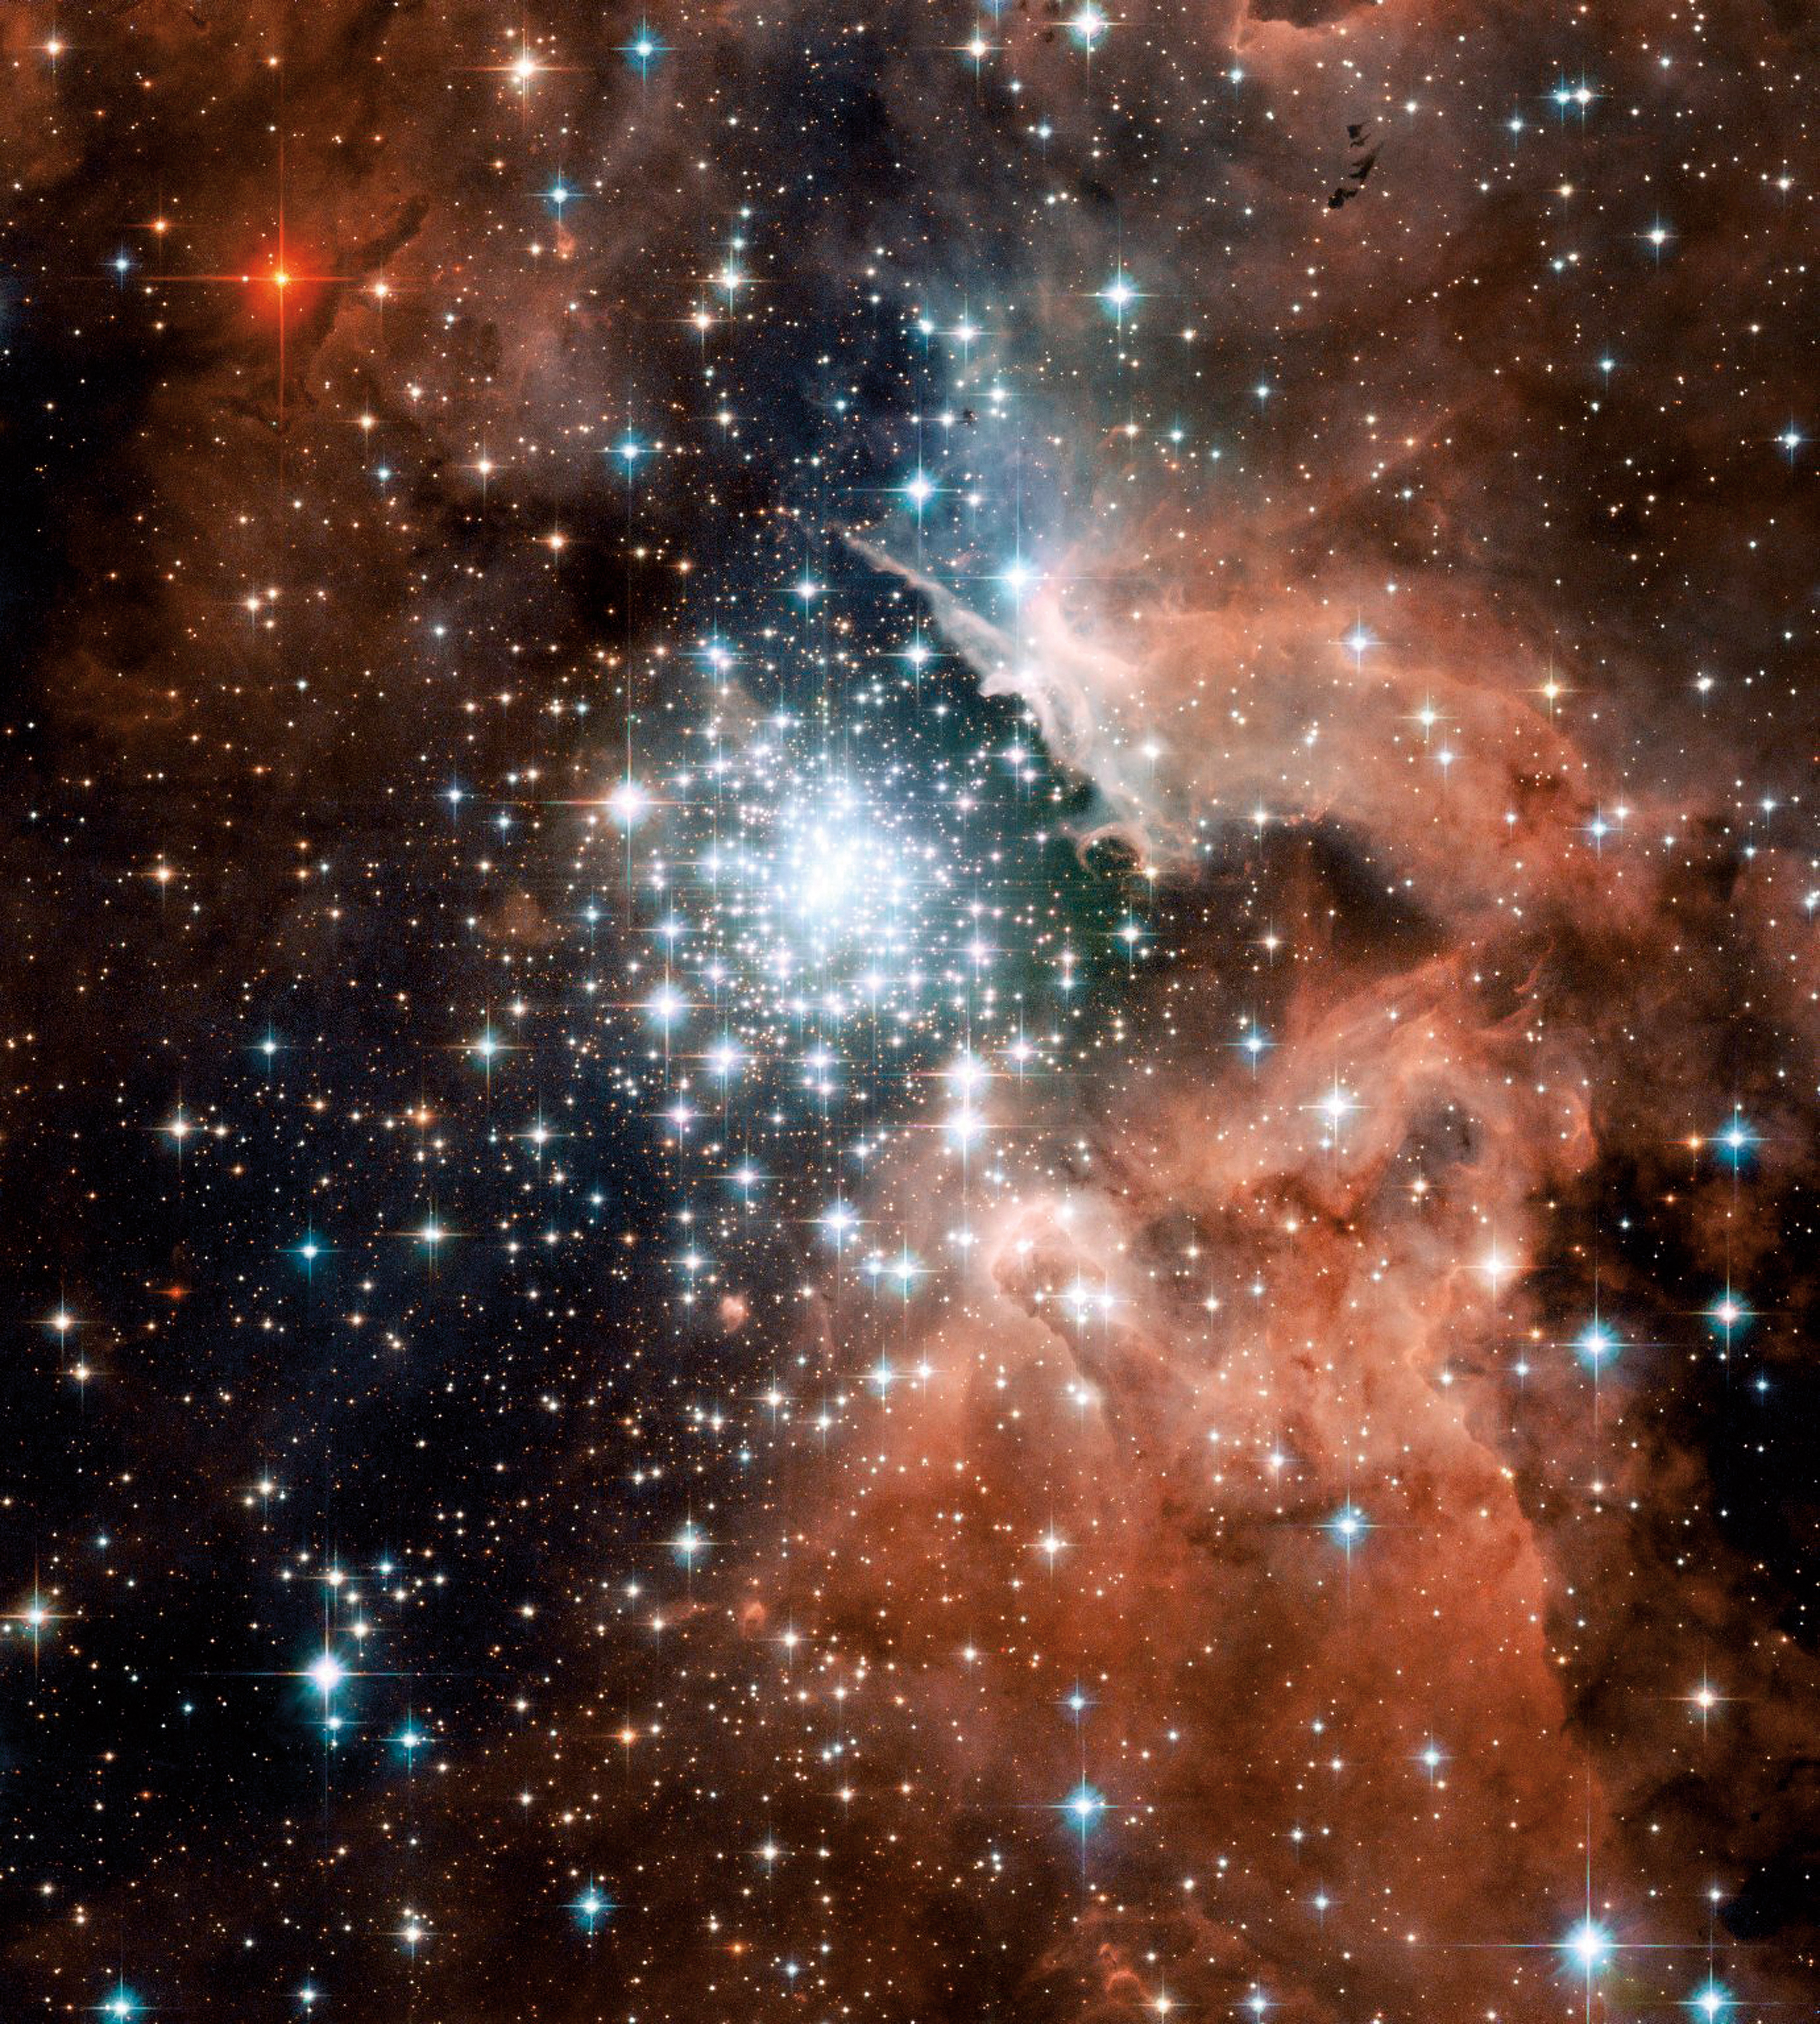 A massive young star cluster in the Carina spiral arm of the Milky Way.